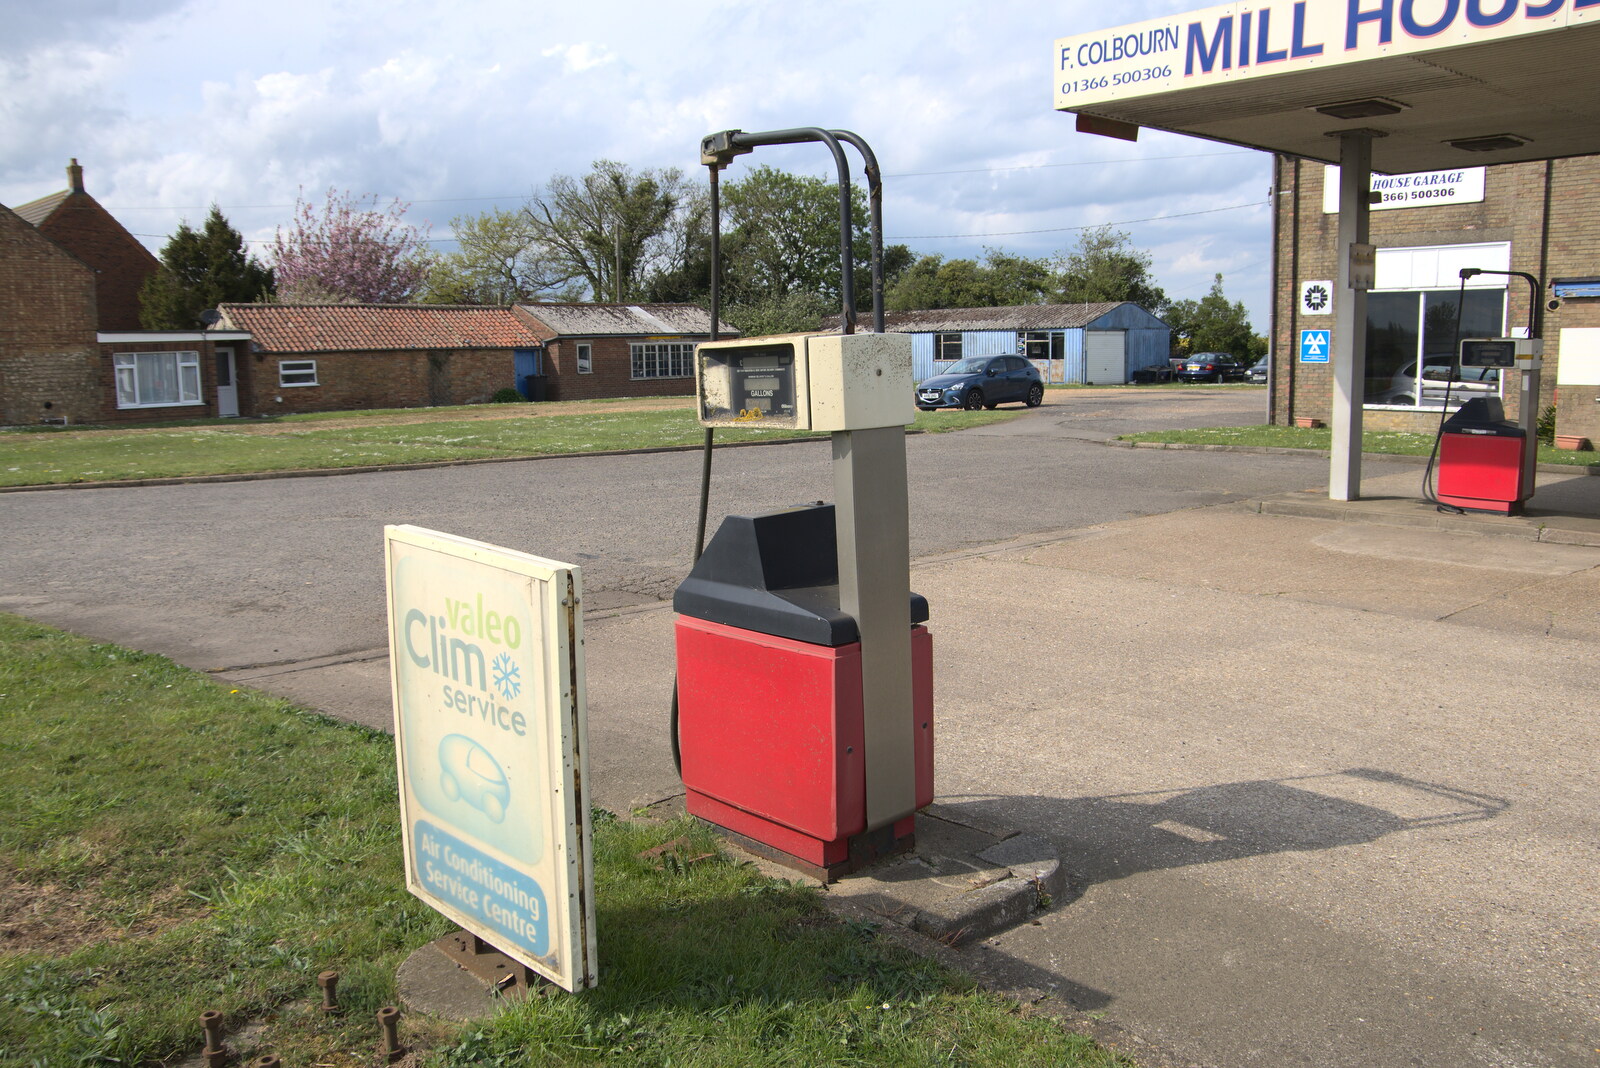 A derelict diesel pump from A Vaccination Afternoon, Swaffham, Norfolk - 9th May 2021